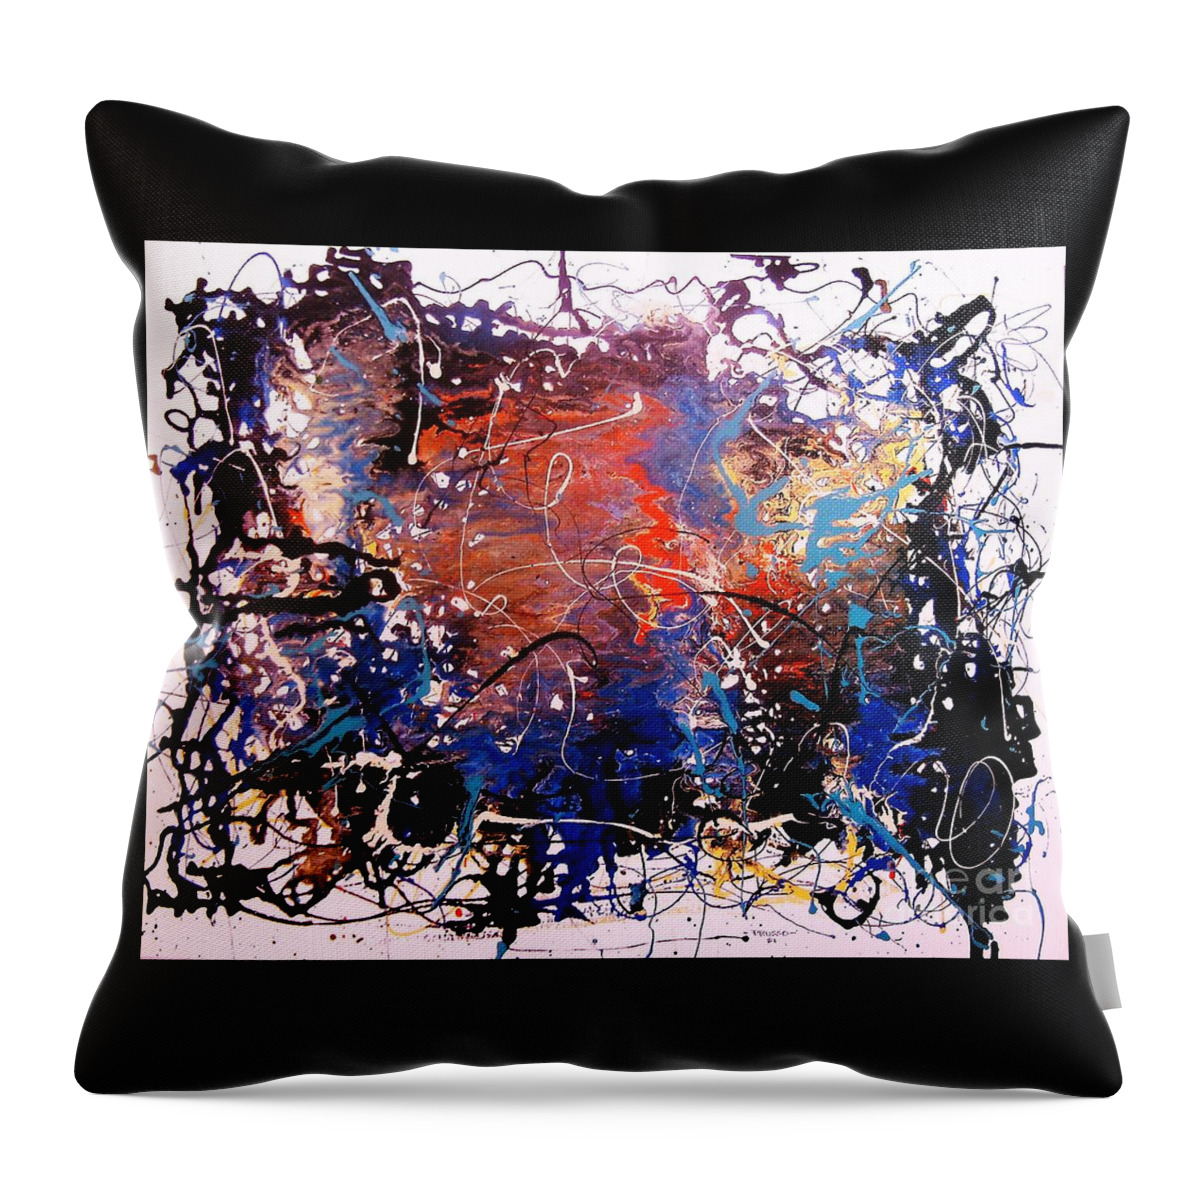 Abstract Impression Throw Pillow featuring the painting Zona esotica by Thea Recuerdo